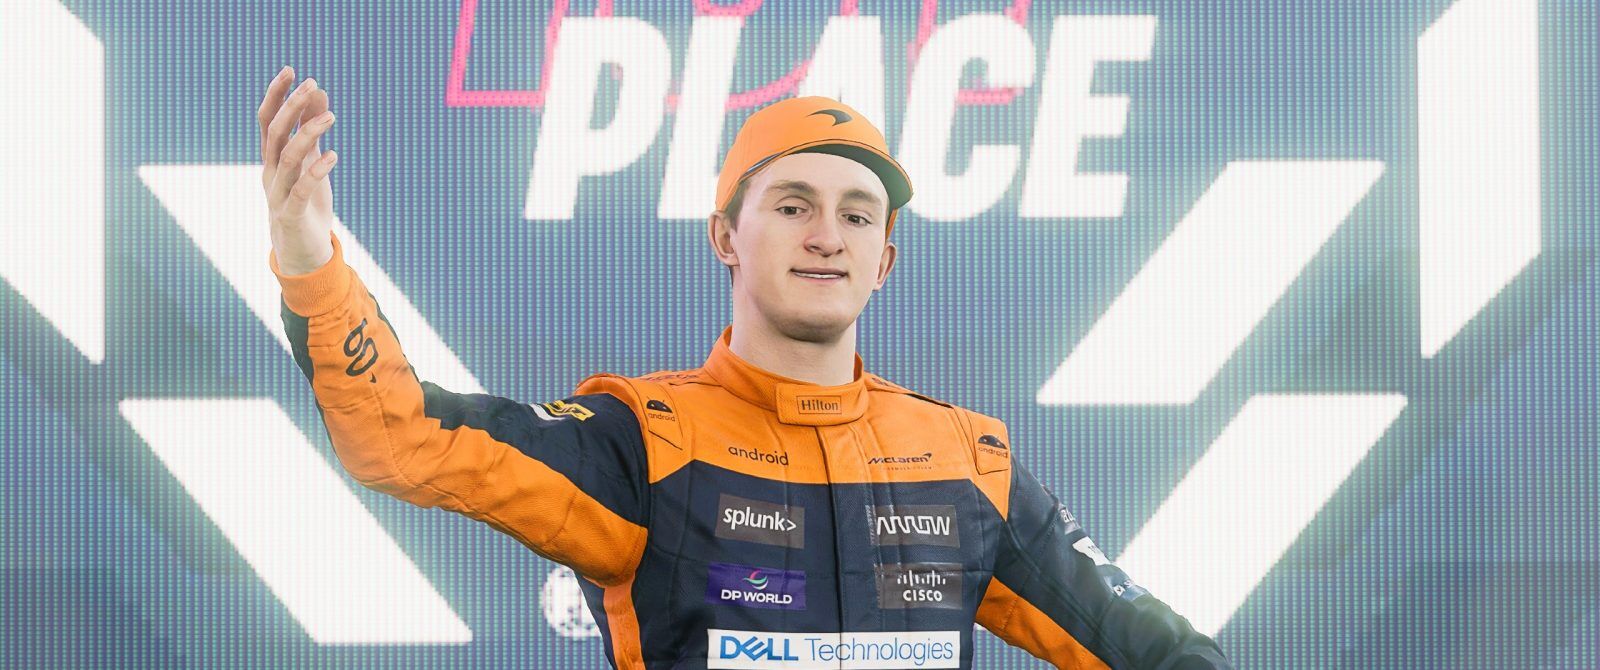 A person in an orange set of overalls and cap holding a trophy.